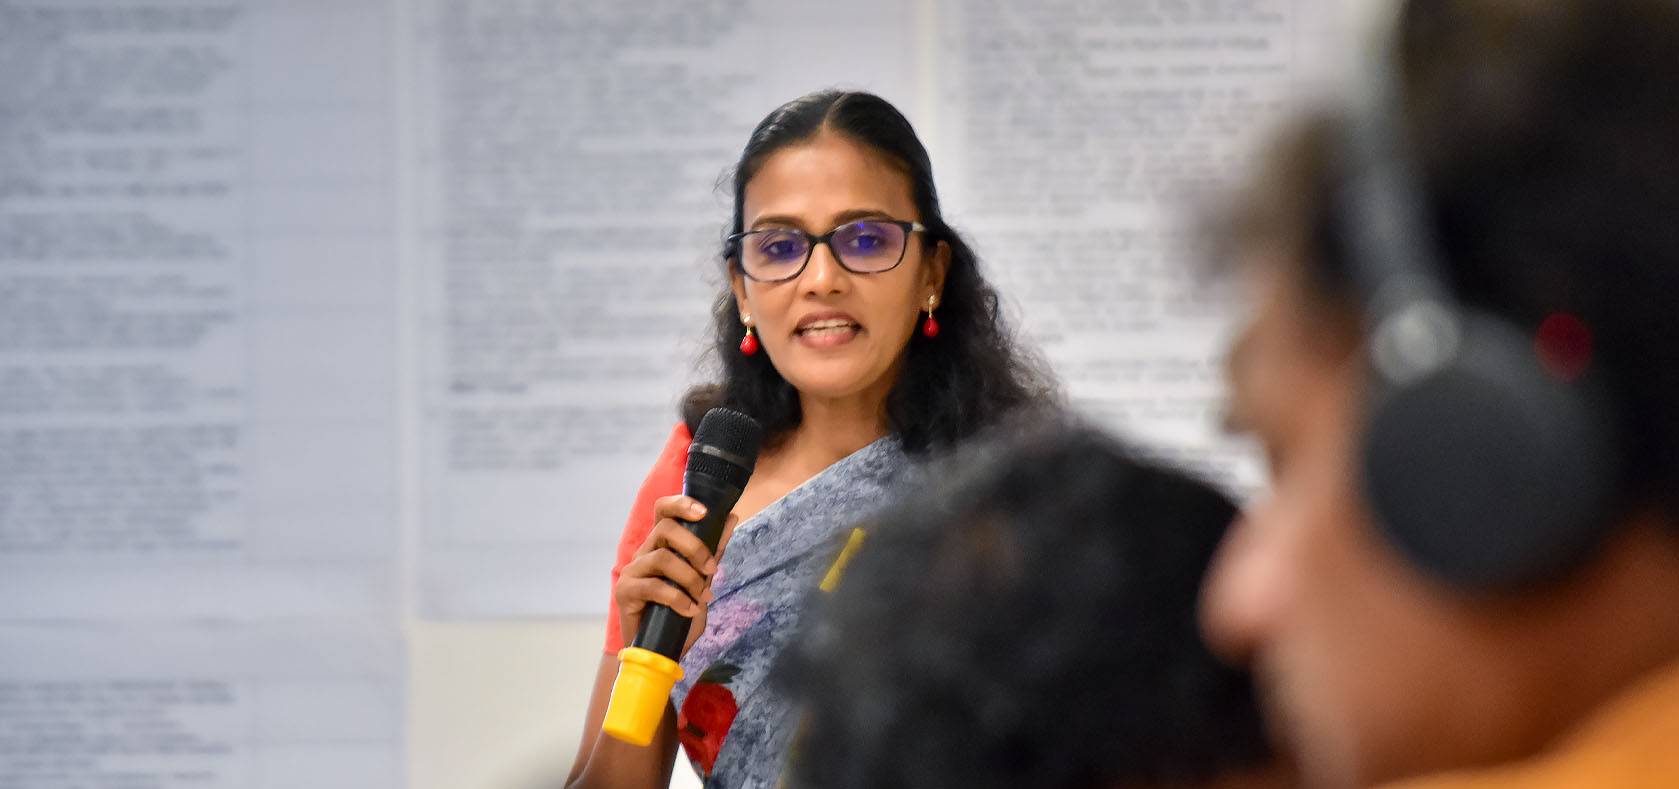 Facilitator of the multi-party dialogues speaks to participants about women, peace and security. 22 September 2022 in Negombo, Western Province, Sri Lanka. Photo: UN Women/Avindi Perera